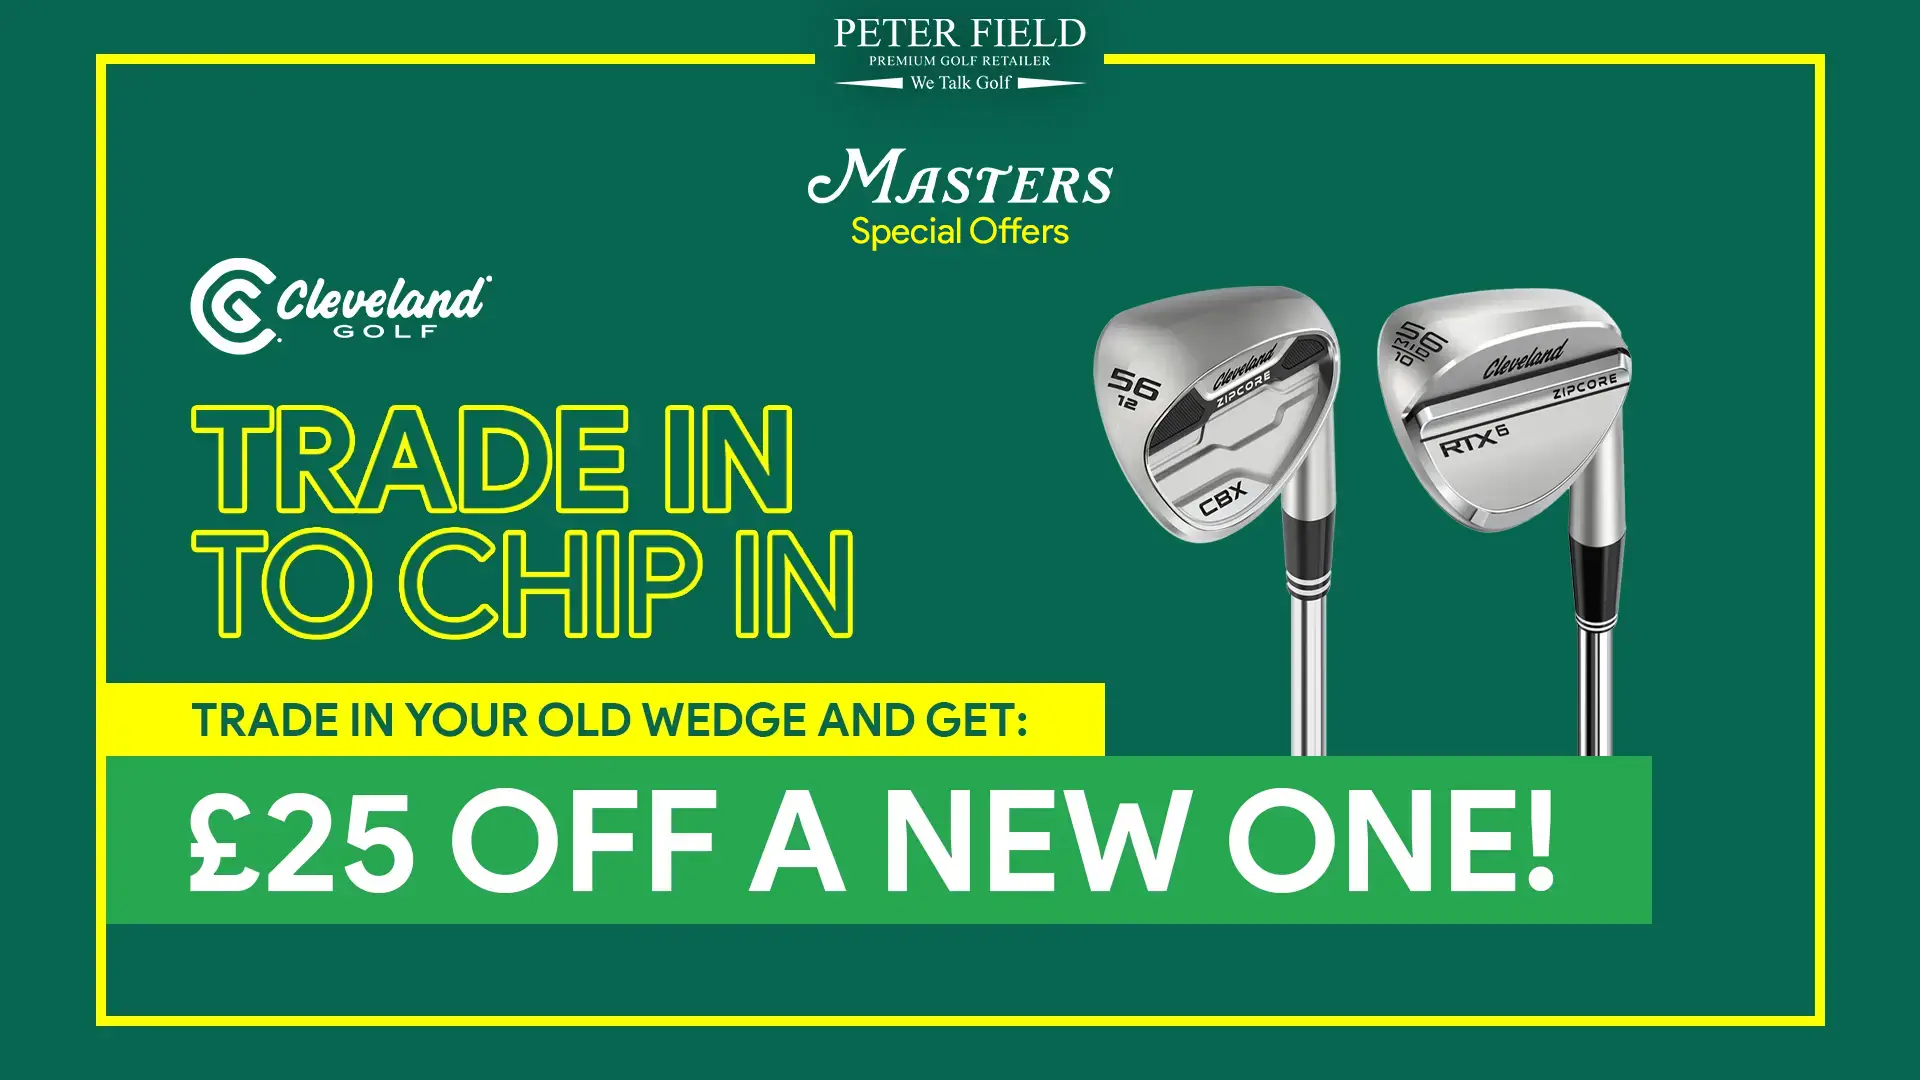 Trade in to chip in. Get £25 off a new Cleveland wedge when you trade your old one in.